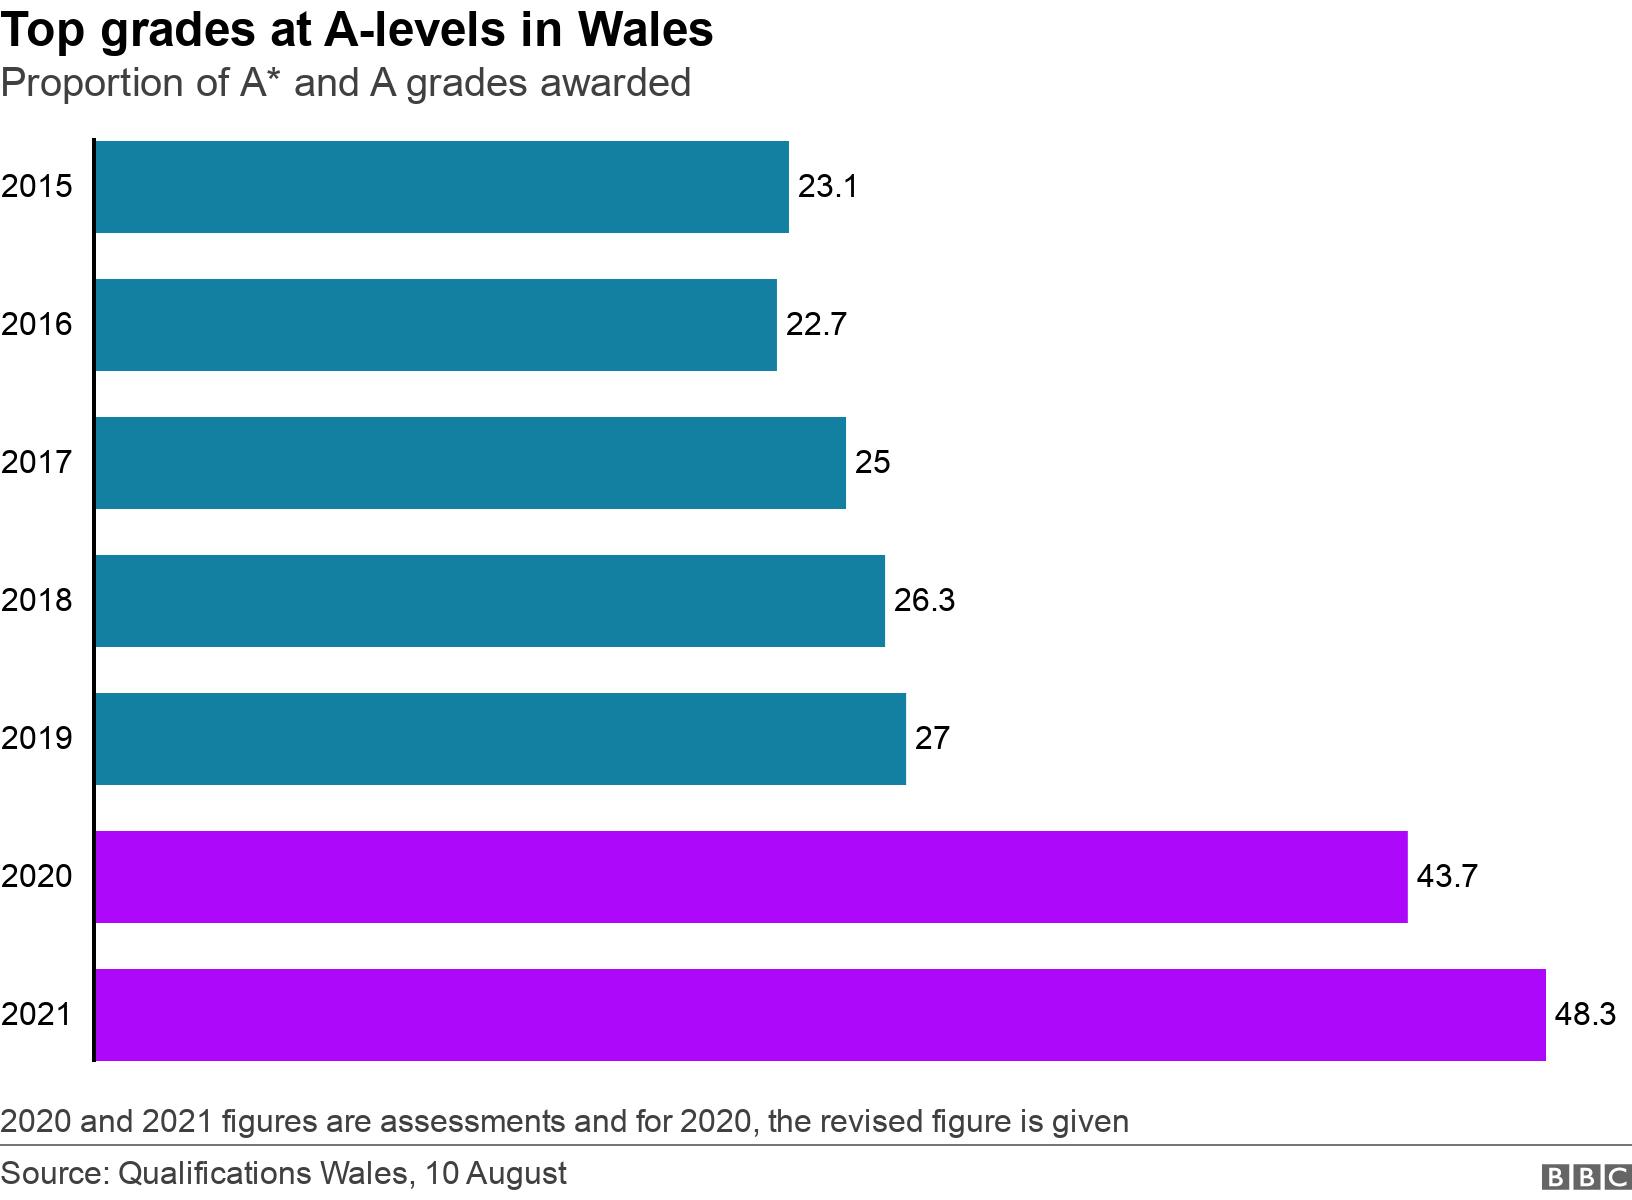 Top grades at A-levels in Wales. Proportion of A* and A grades awarded.  2020 and 2021 figures are assessments and for 2020, the revised figure is given.